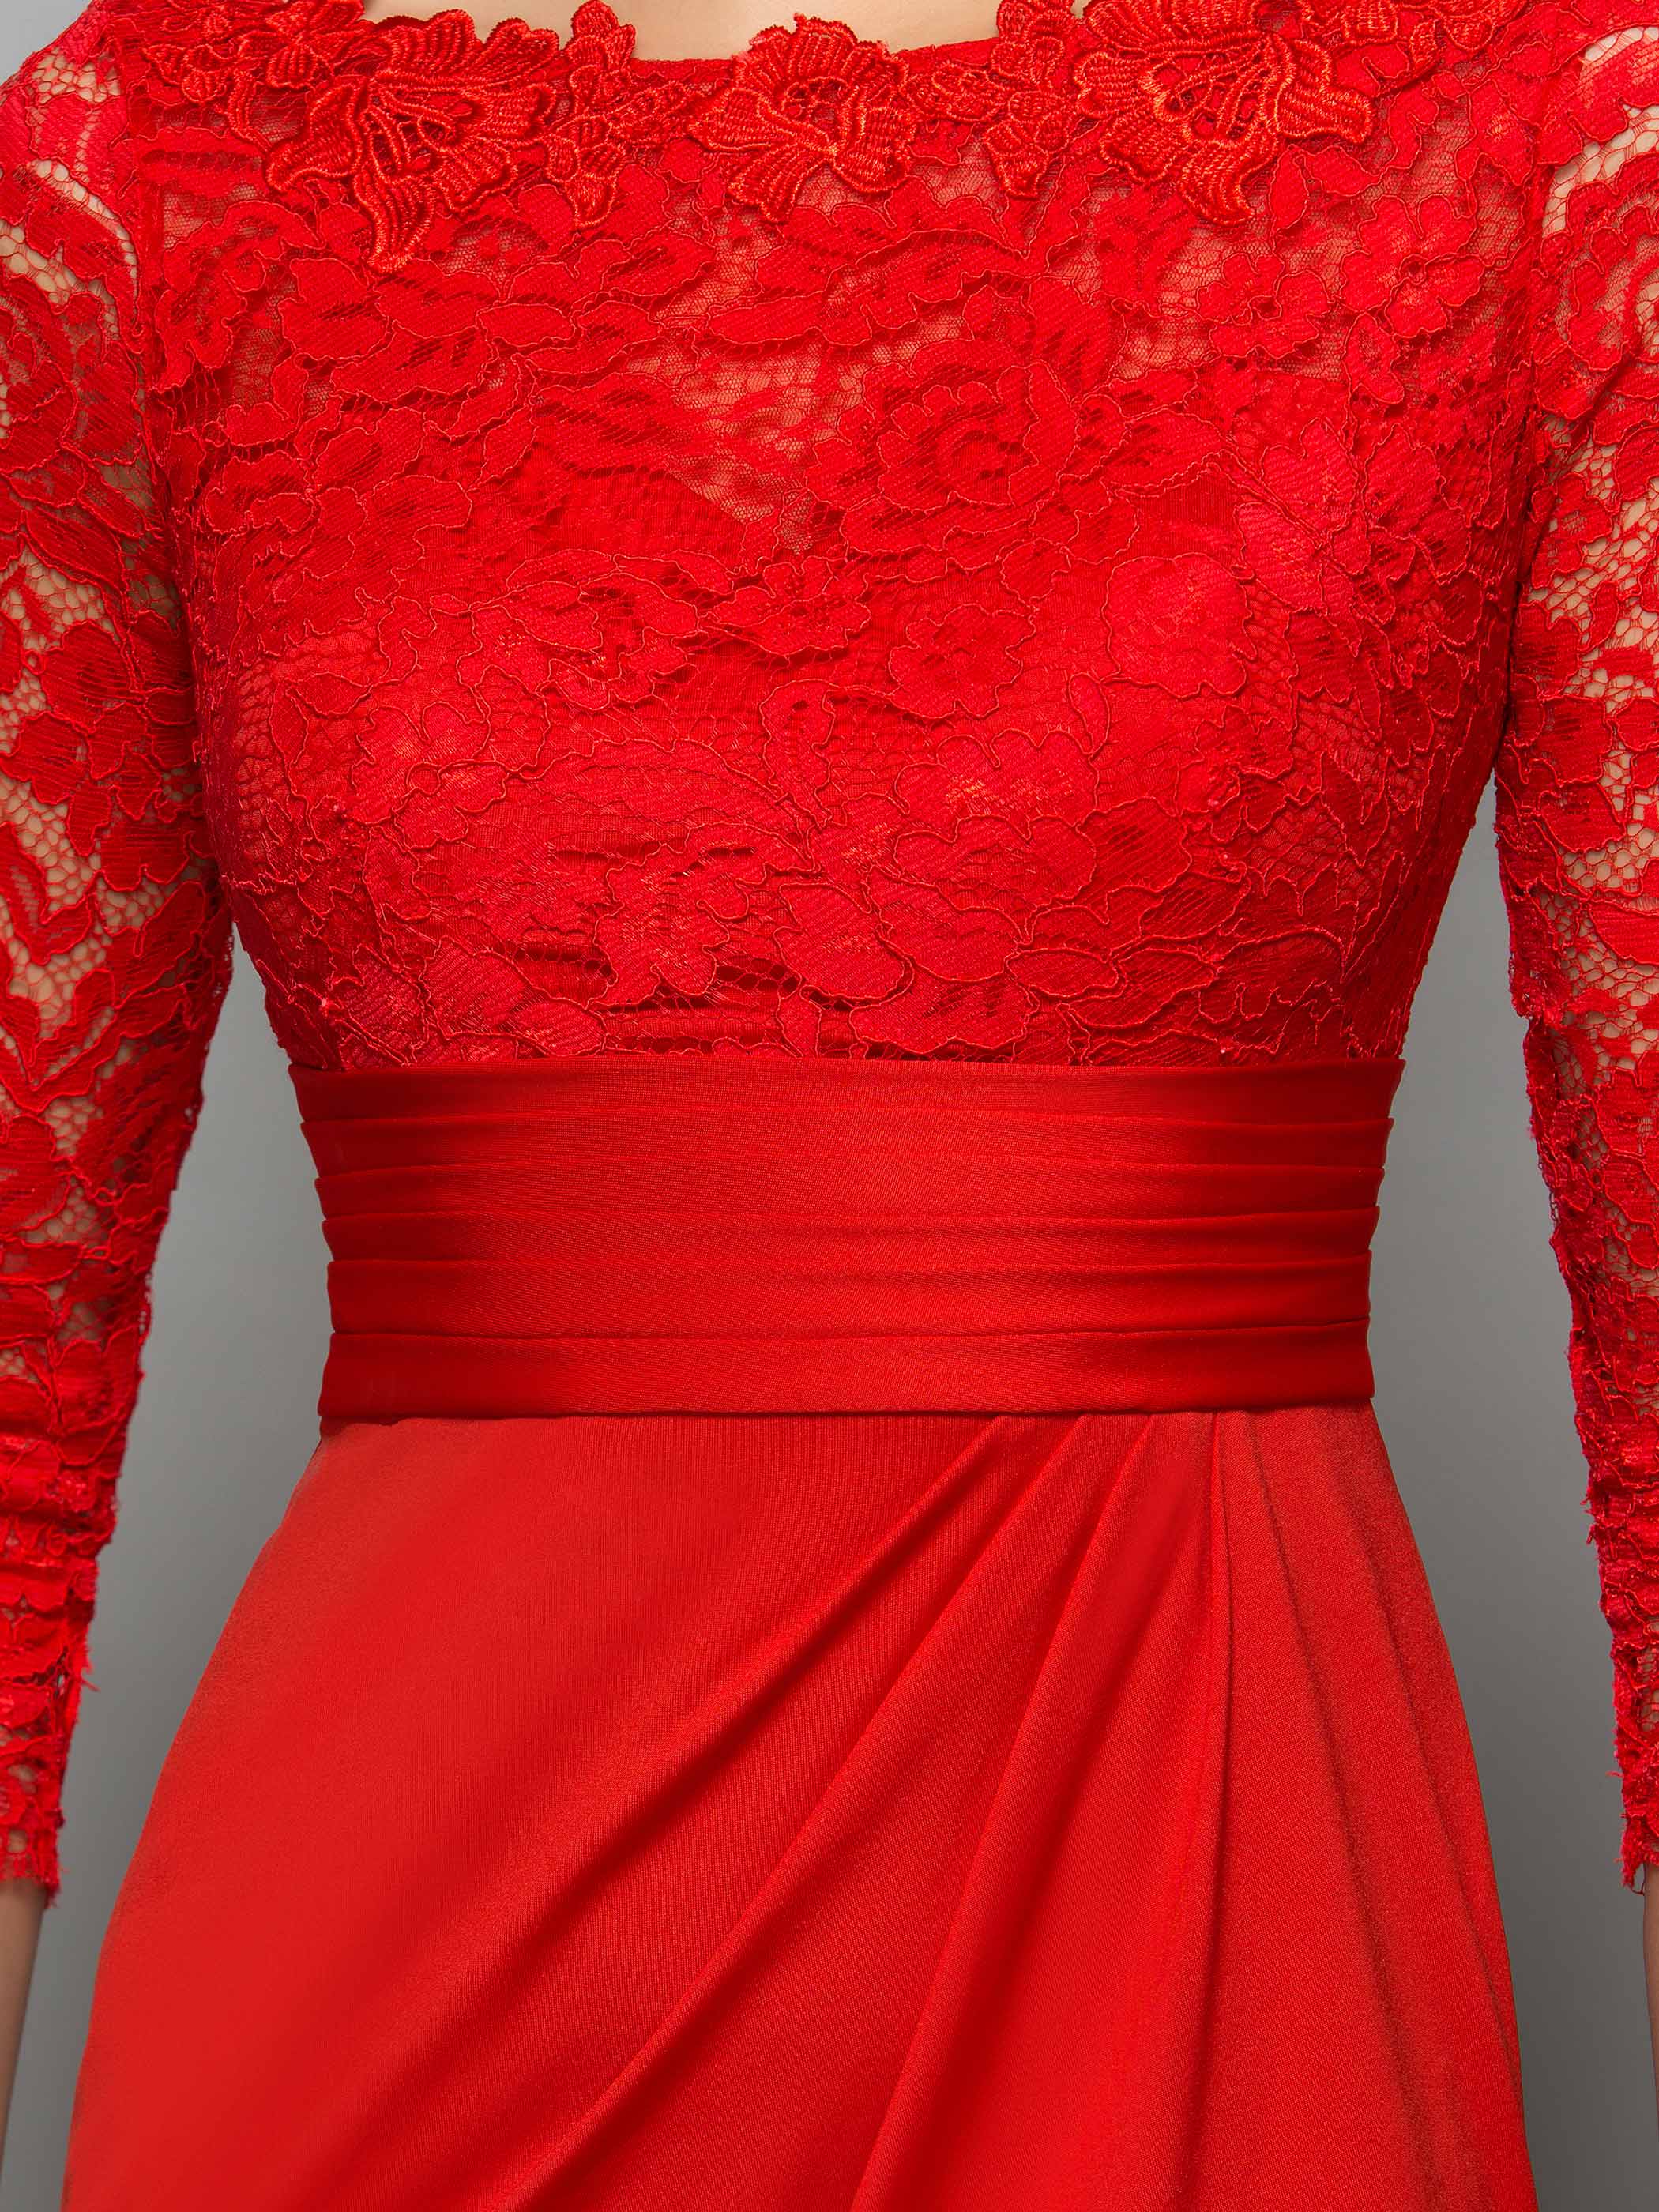 Sheath Button Lace Red Cocktail Dress with Sleeves